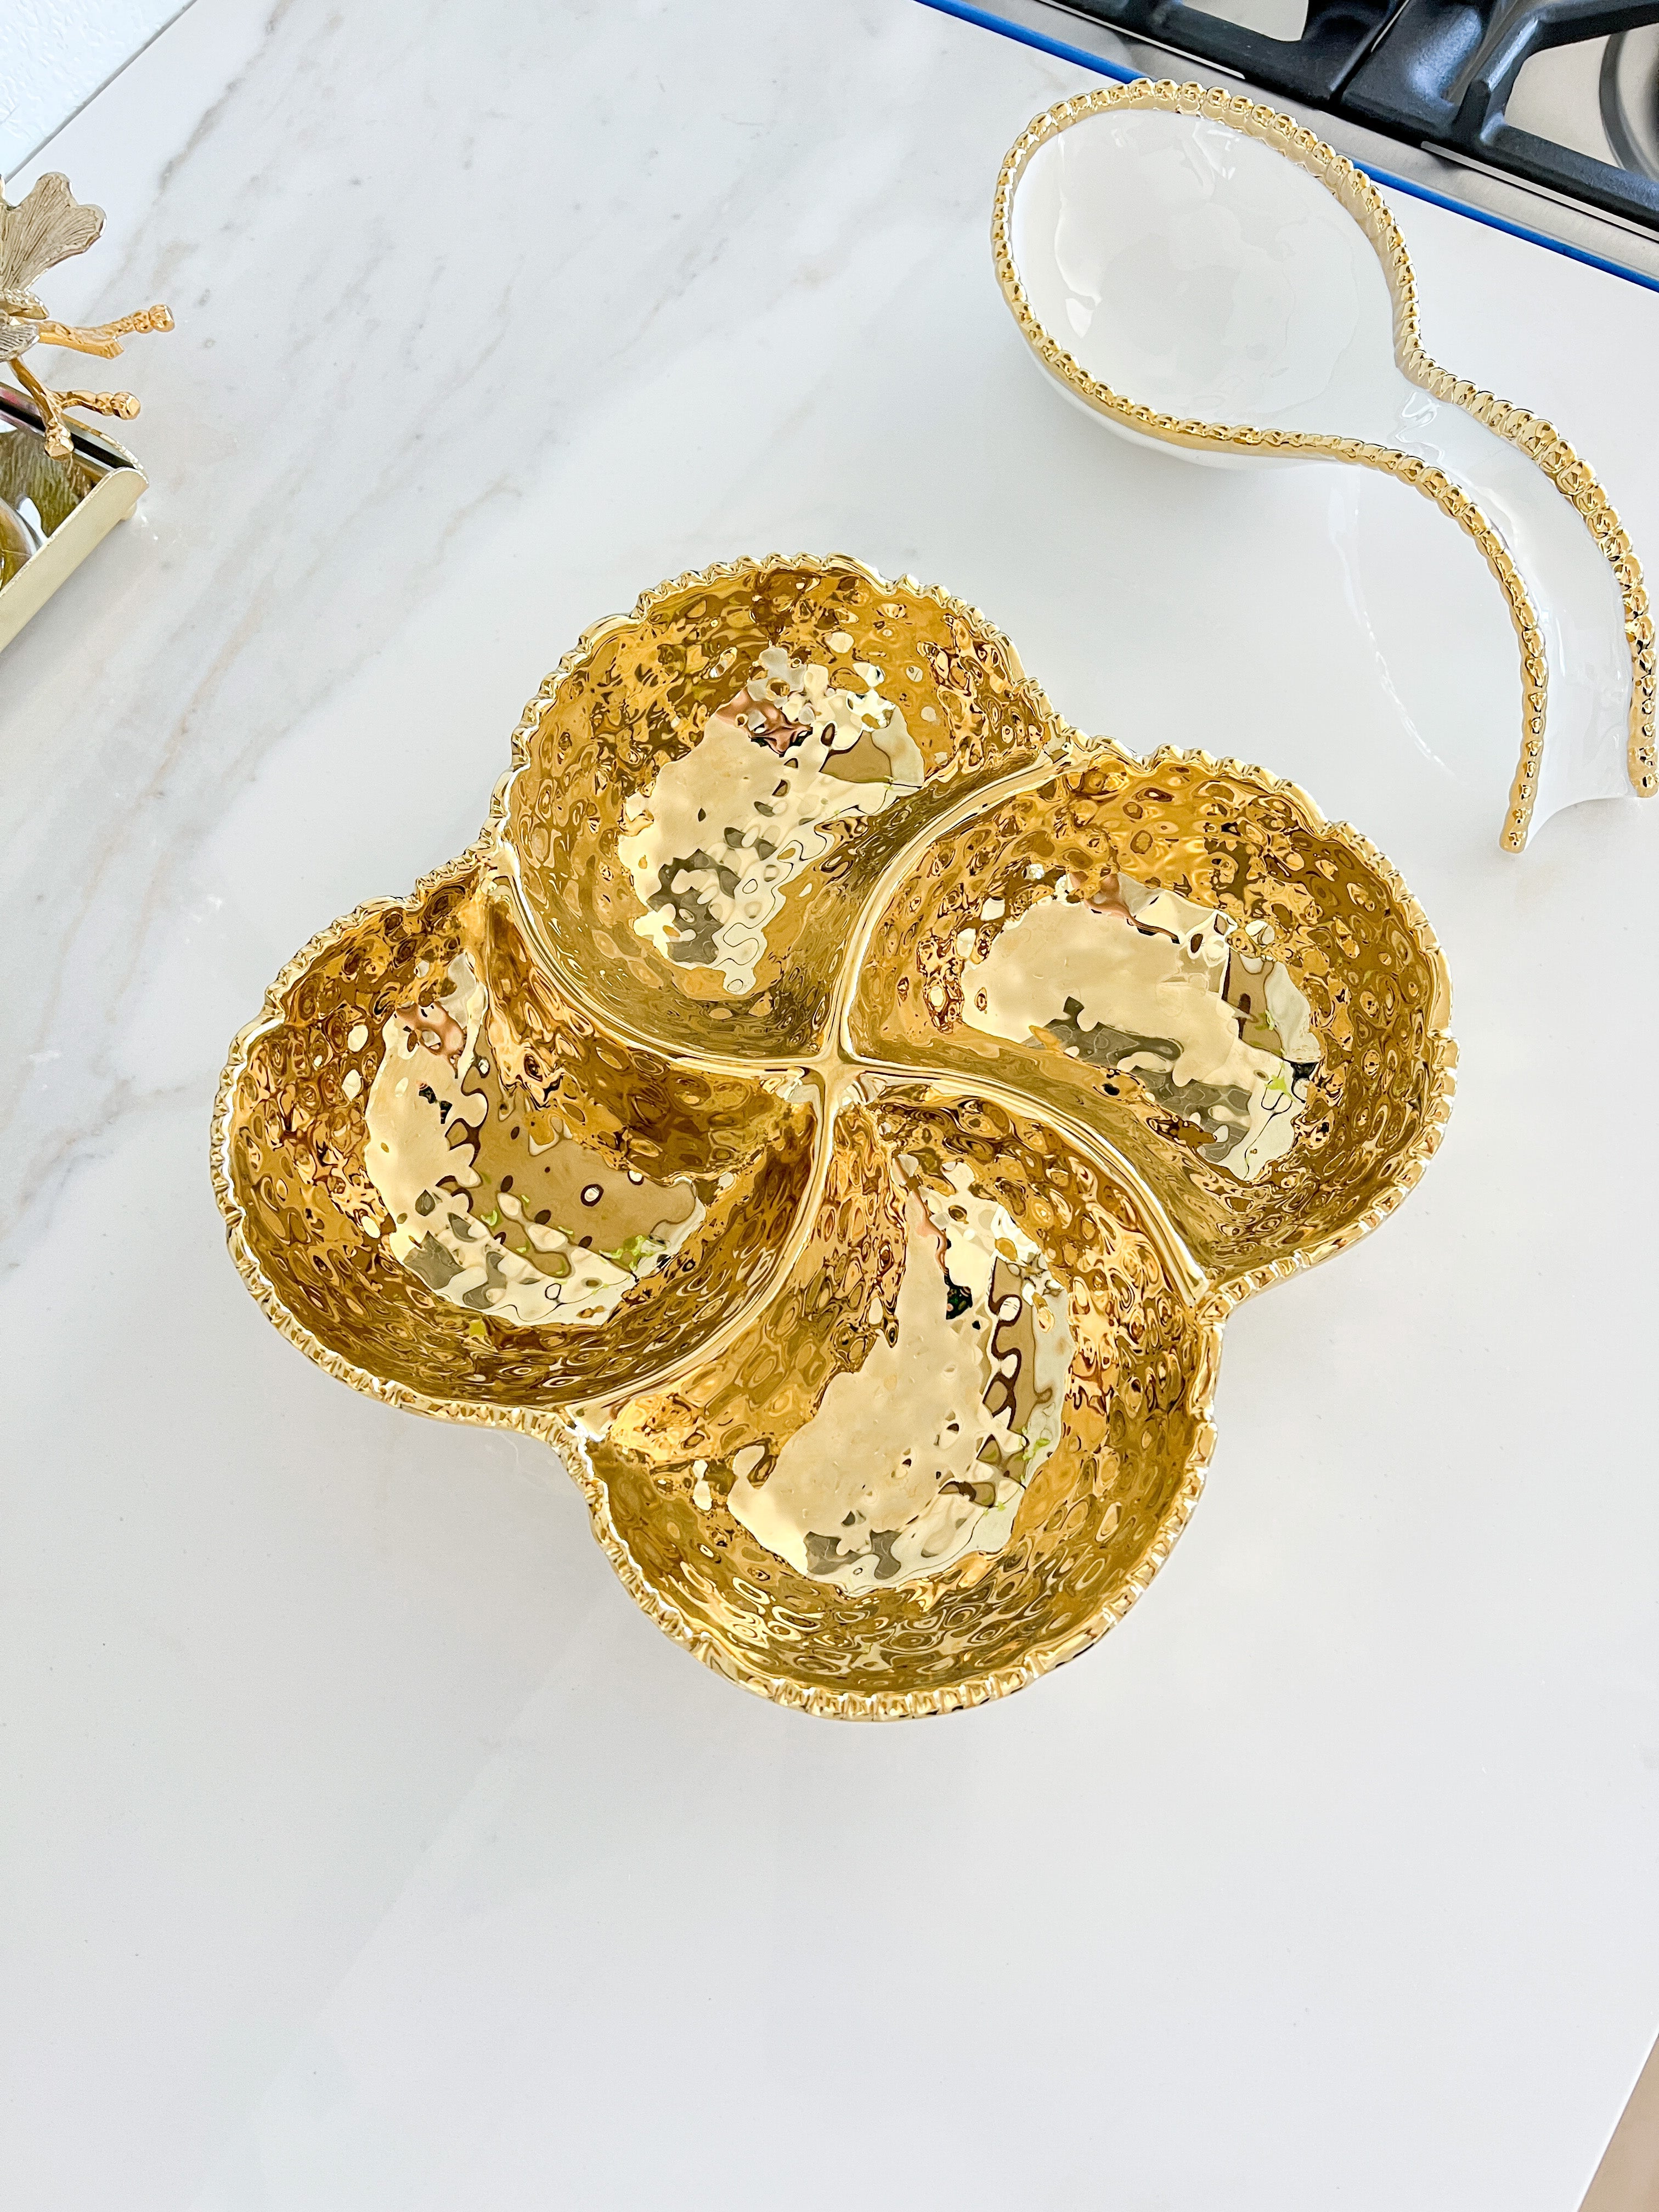 Gold Textured 4-Section Snack Bowl - HTS HOME DECOR